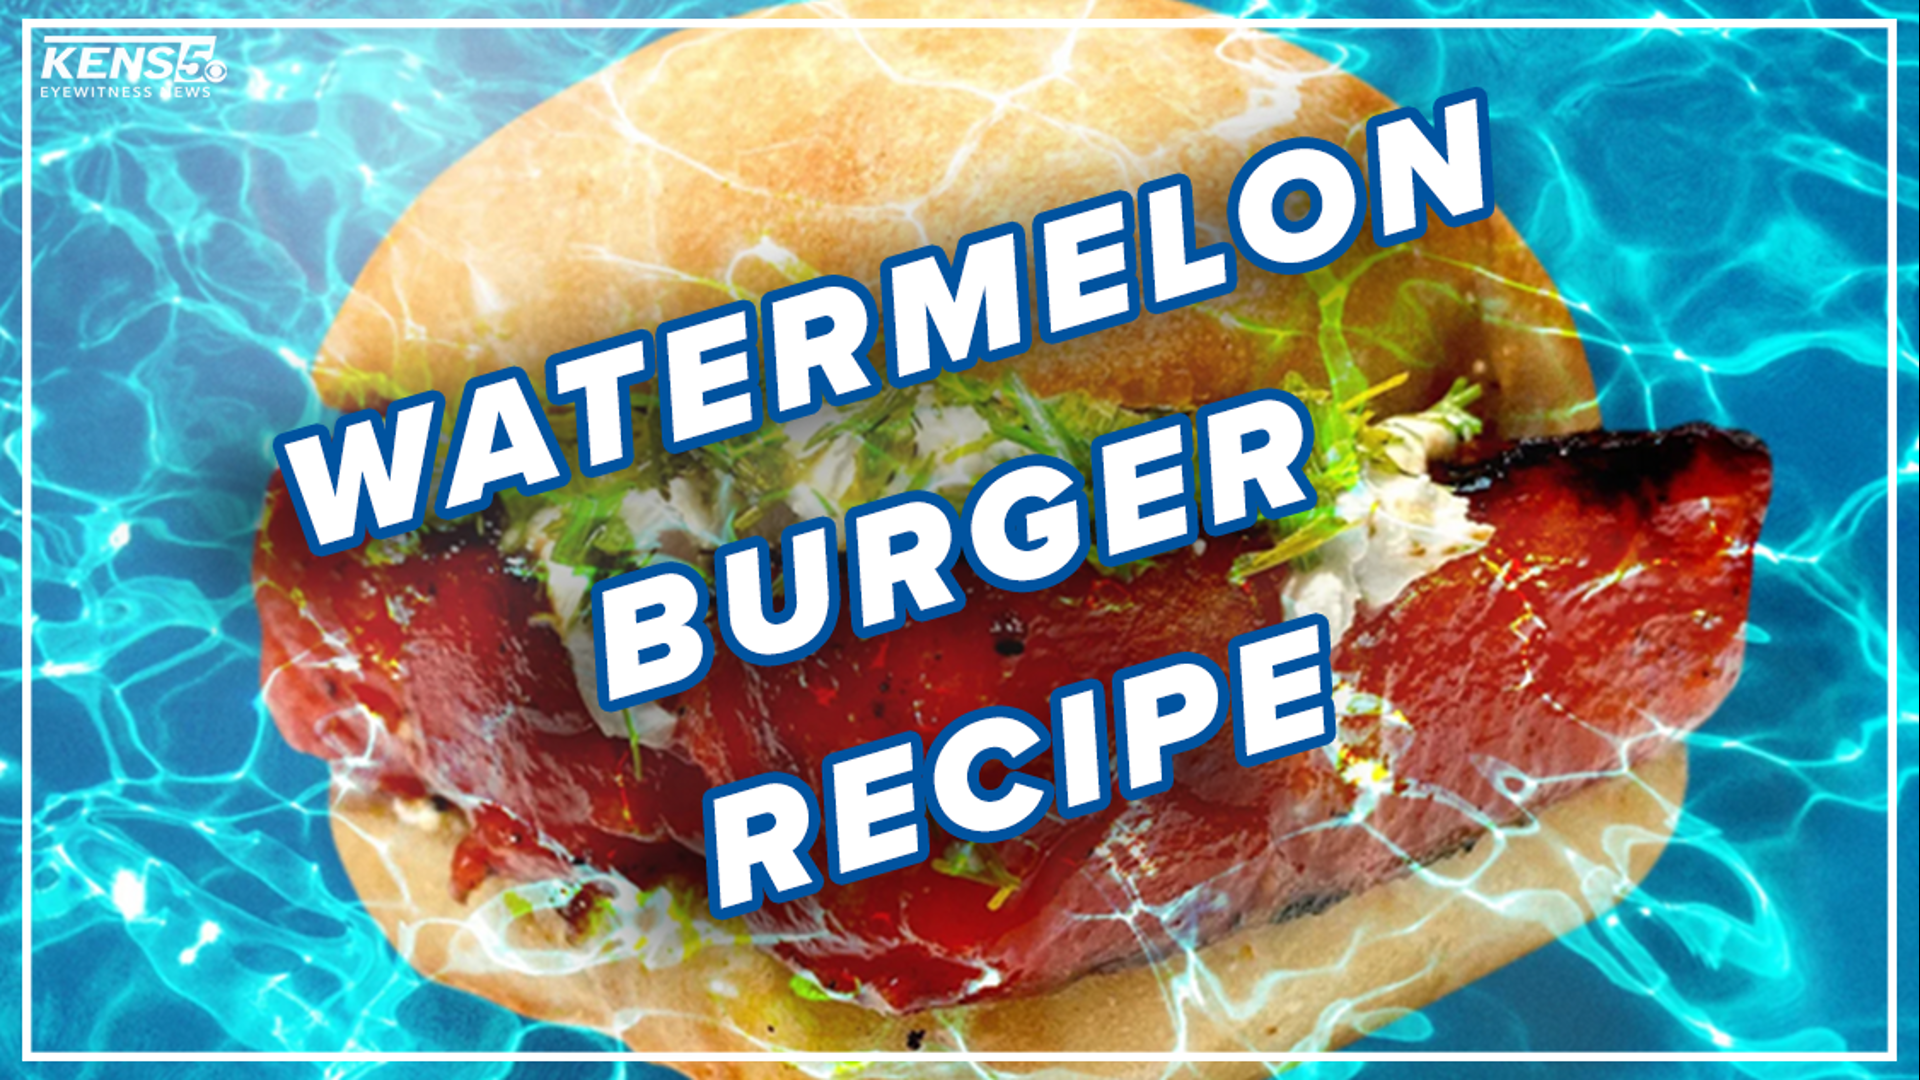 Looking for a summertime meal? Digital reporter Lexi Hazlett shows you a recipe posted on The Takeout's website of a watermelon burger.